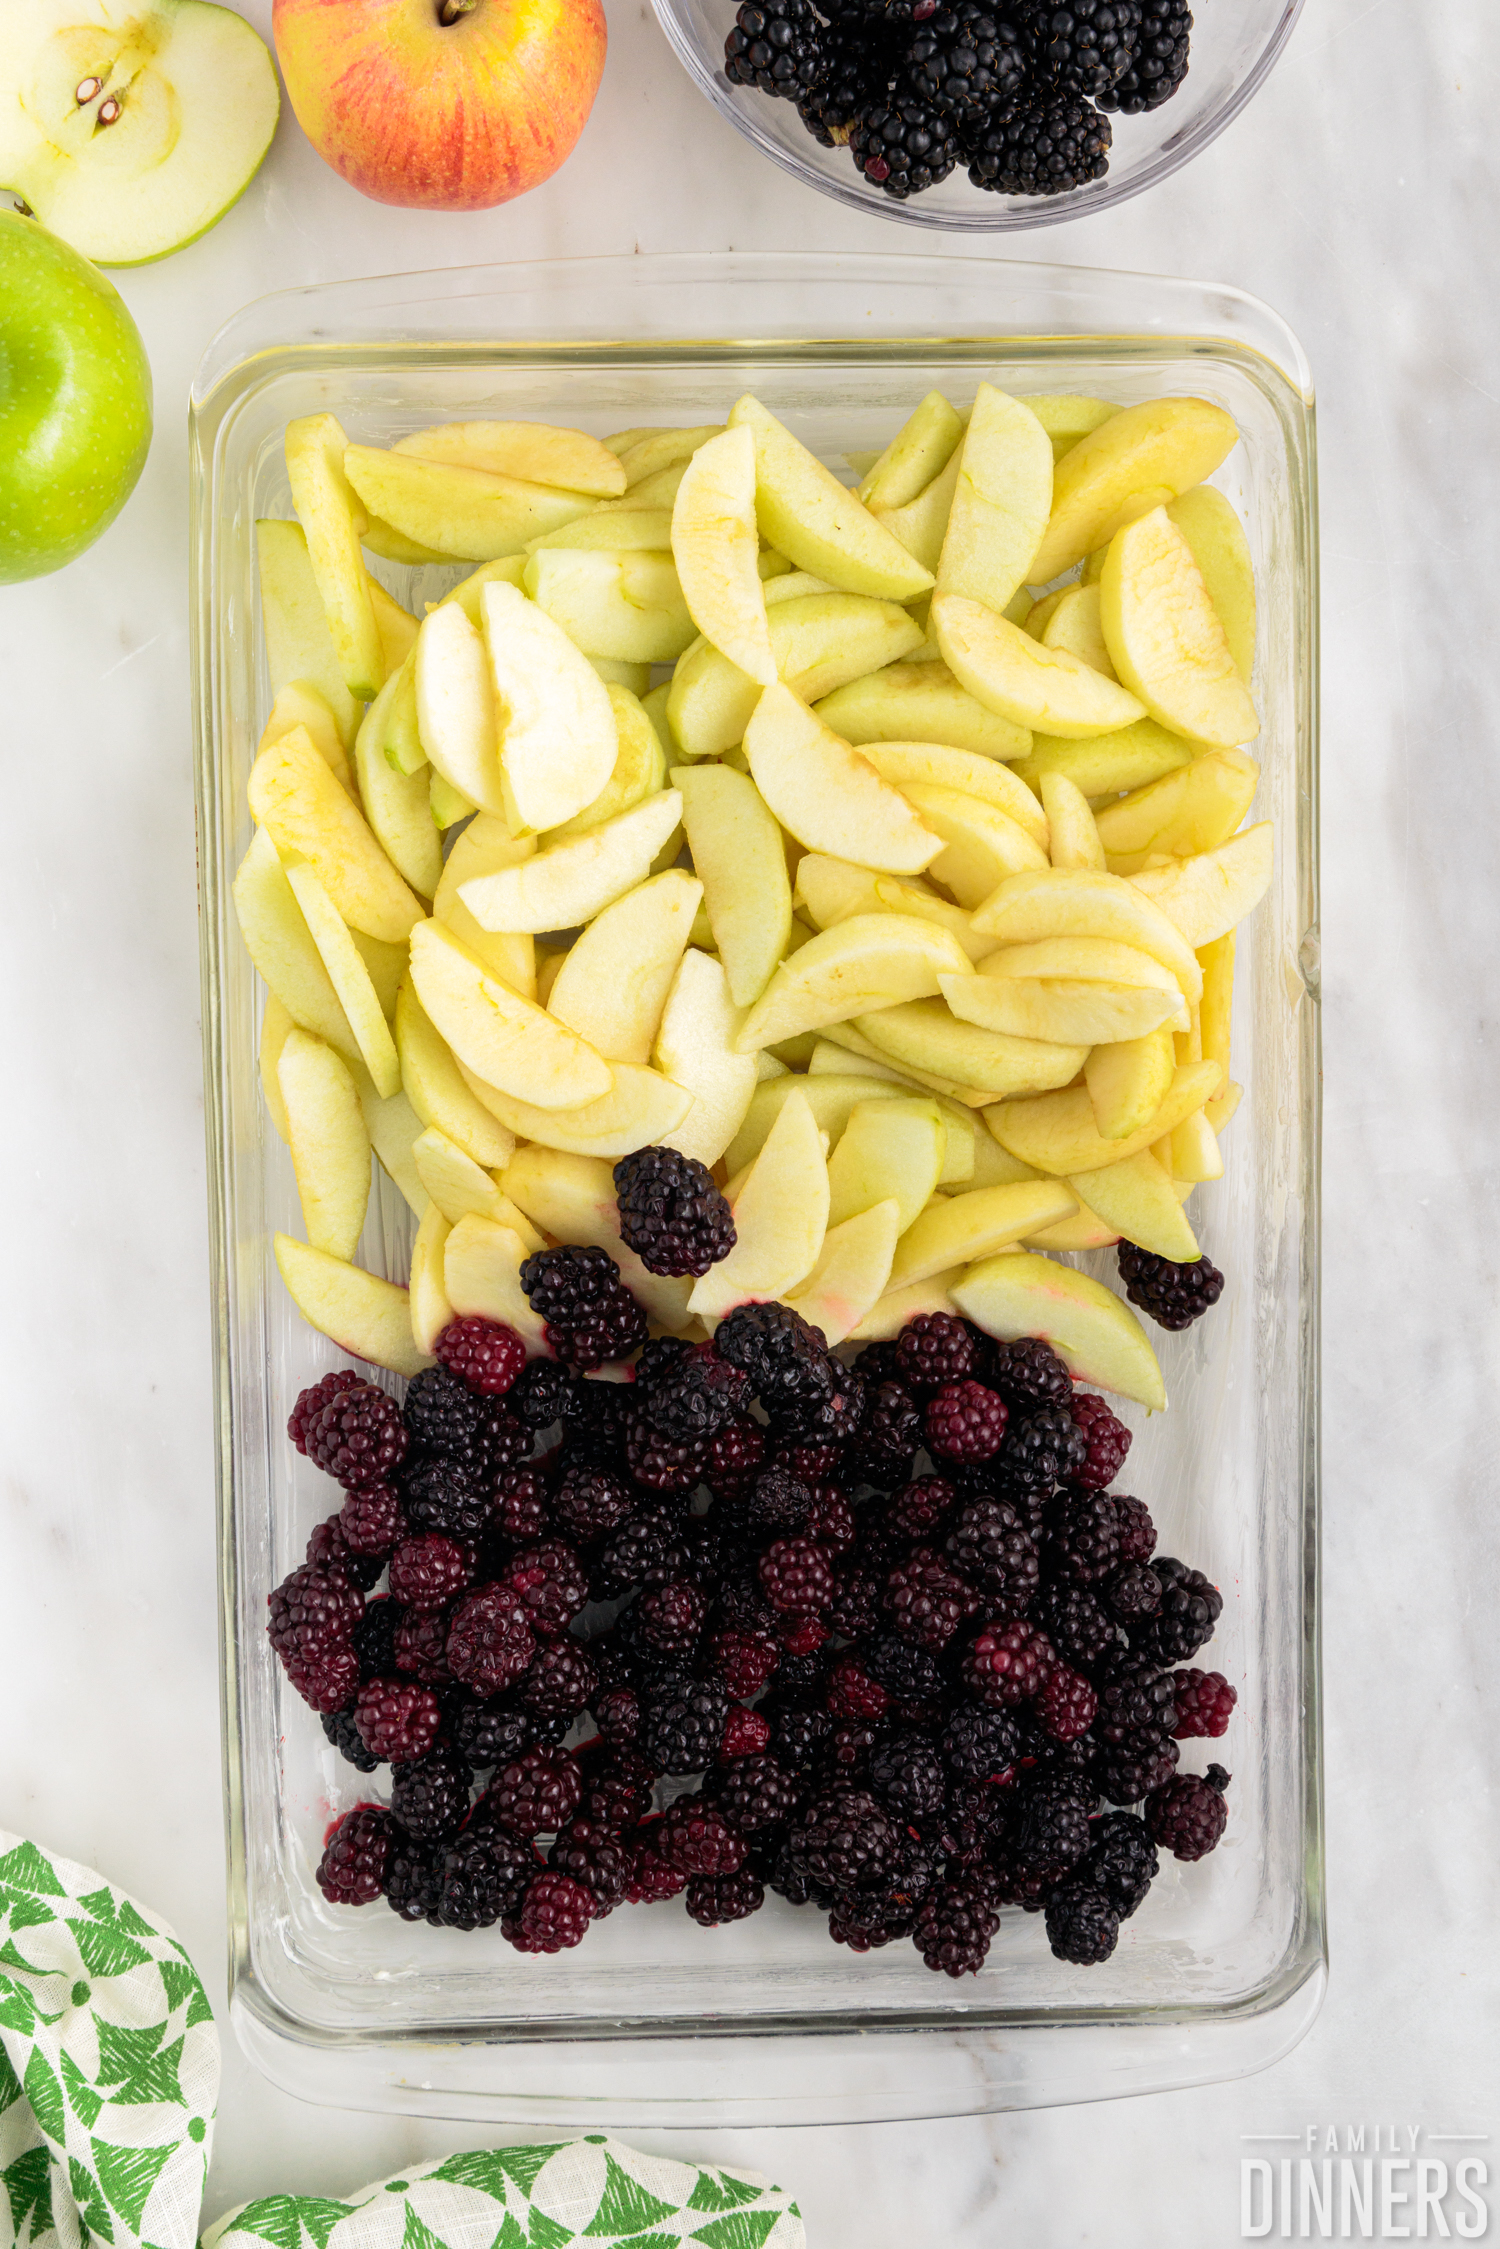 blackberries and sliced apples arranged in a rectangular glass baking dish,